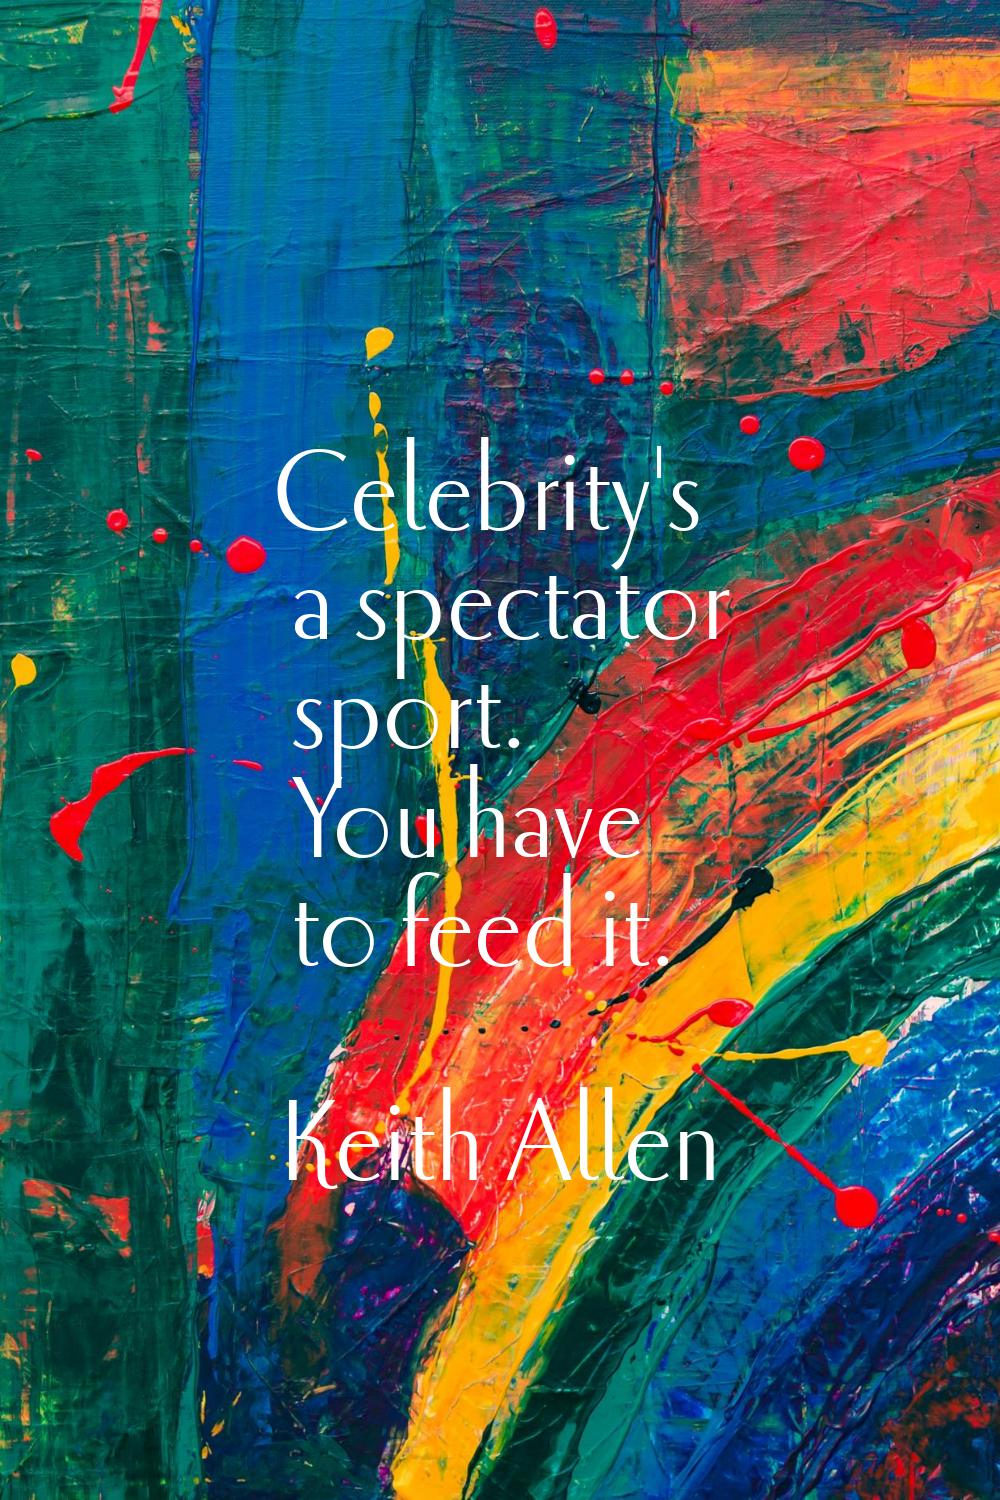 Celebrity's a spectator sport. You have to feed it.